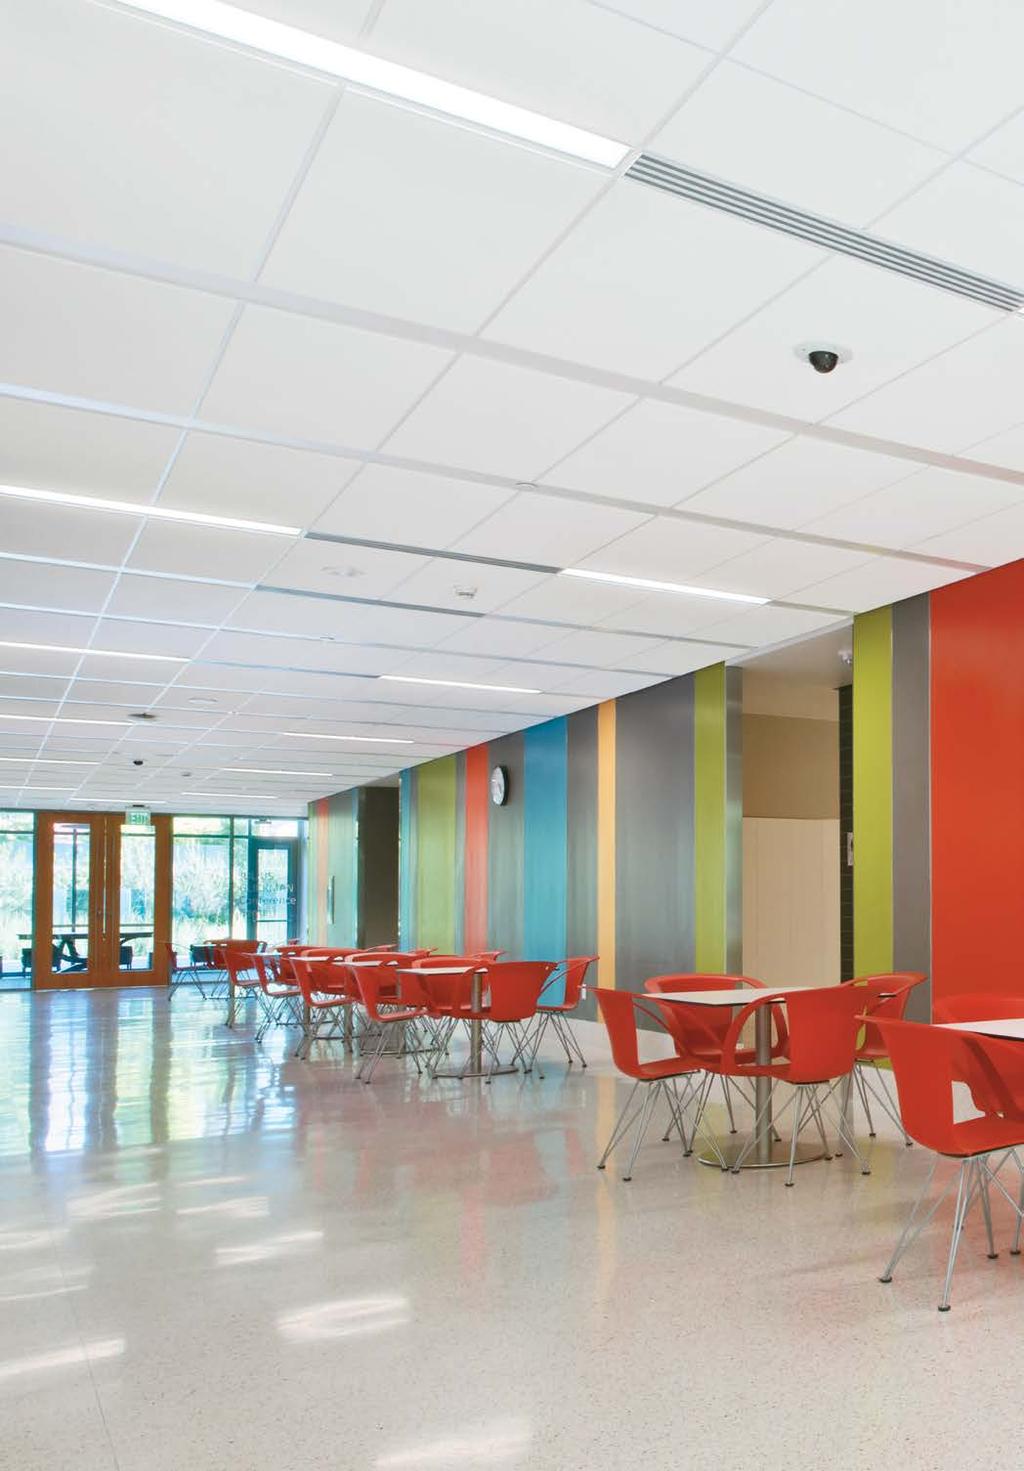 TECHZONE Ceiling Systems 6" x 48" Linear Diffuser Create a sleek ceiling design with uninterrupted ribbons of light